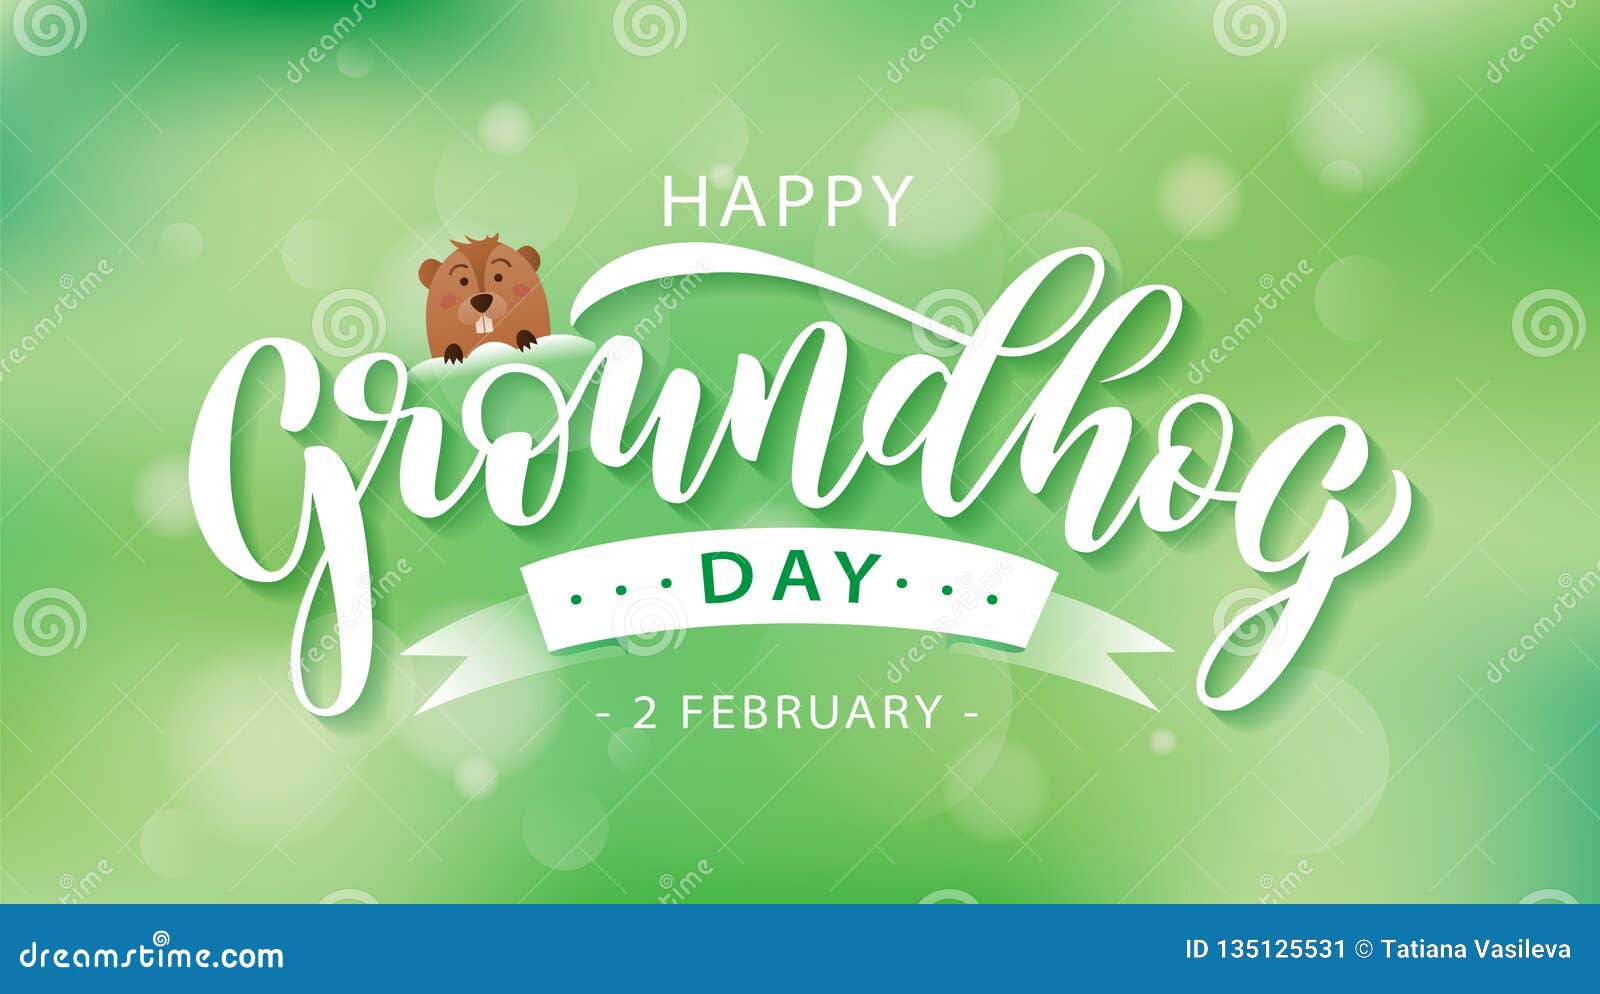 happy groundhog day. hand drawn lettering text with cute groundhog. 2 february.  